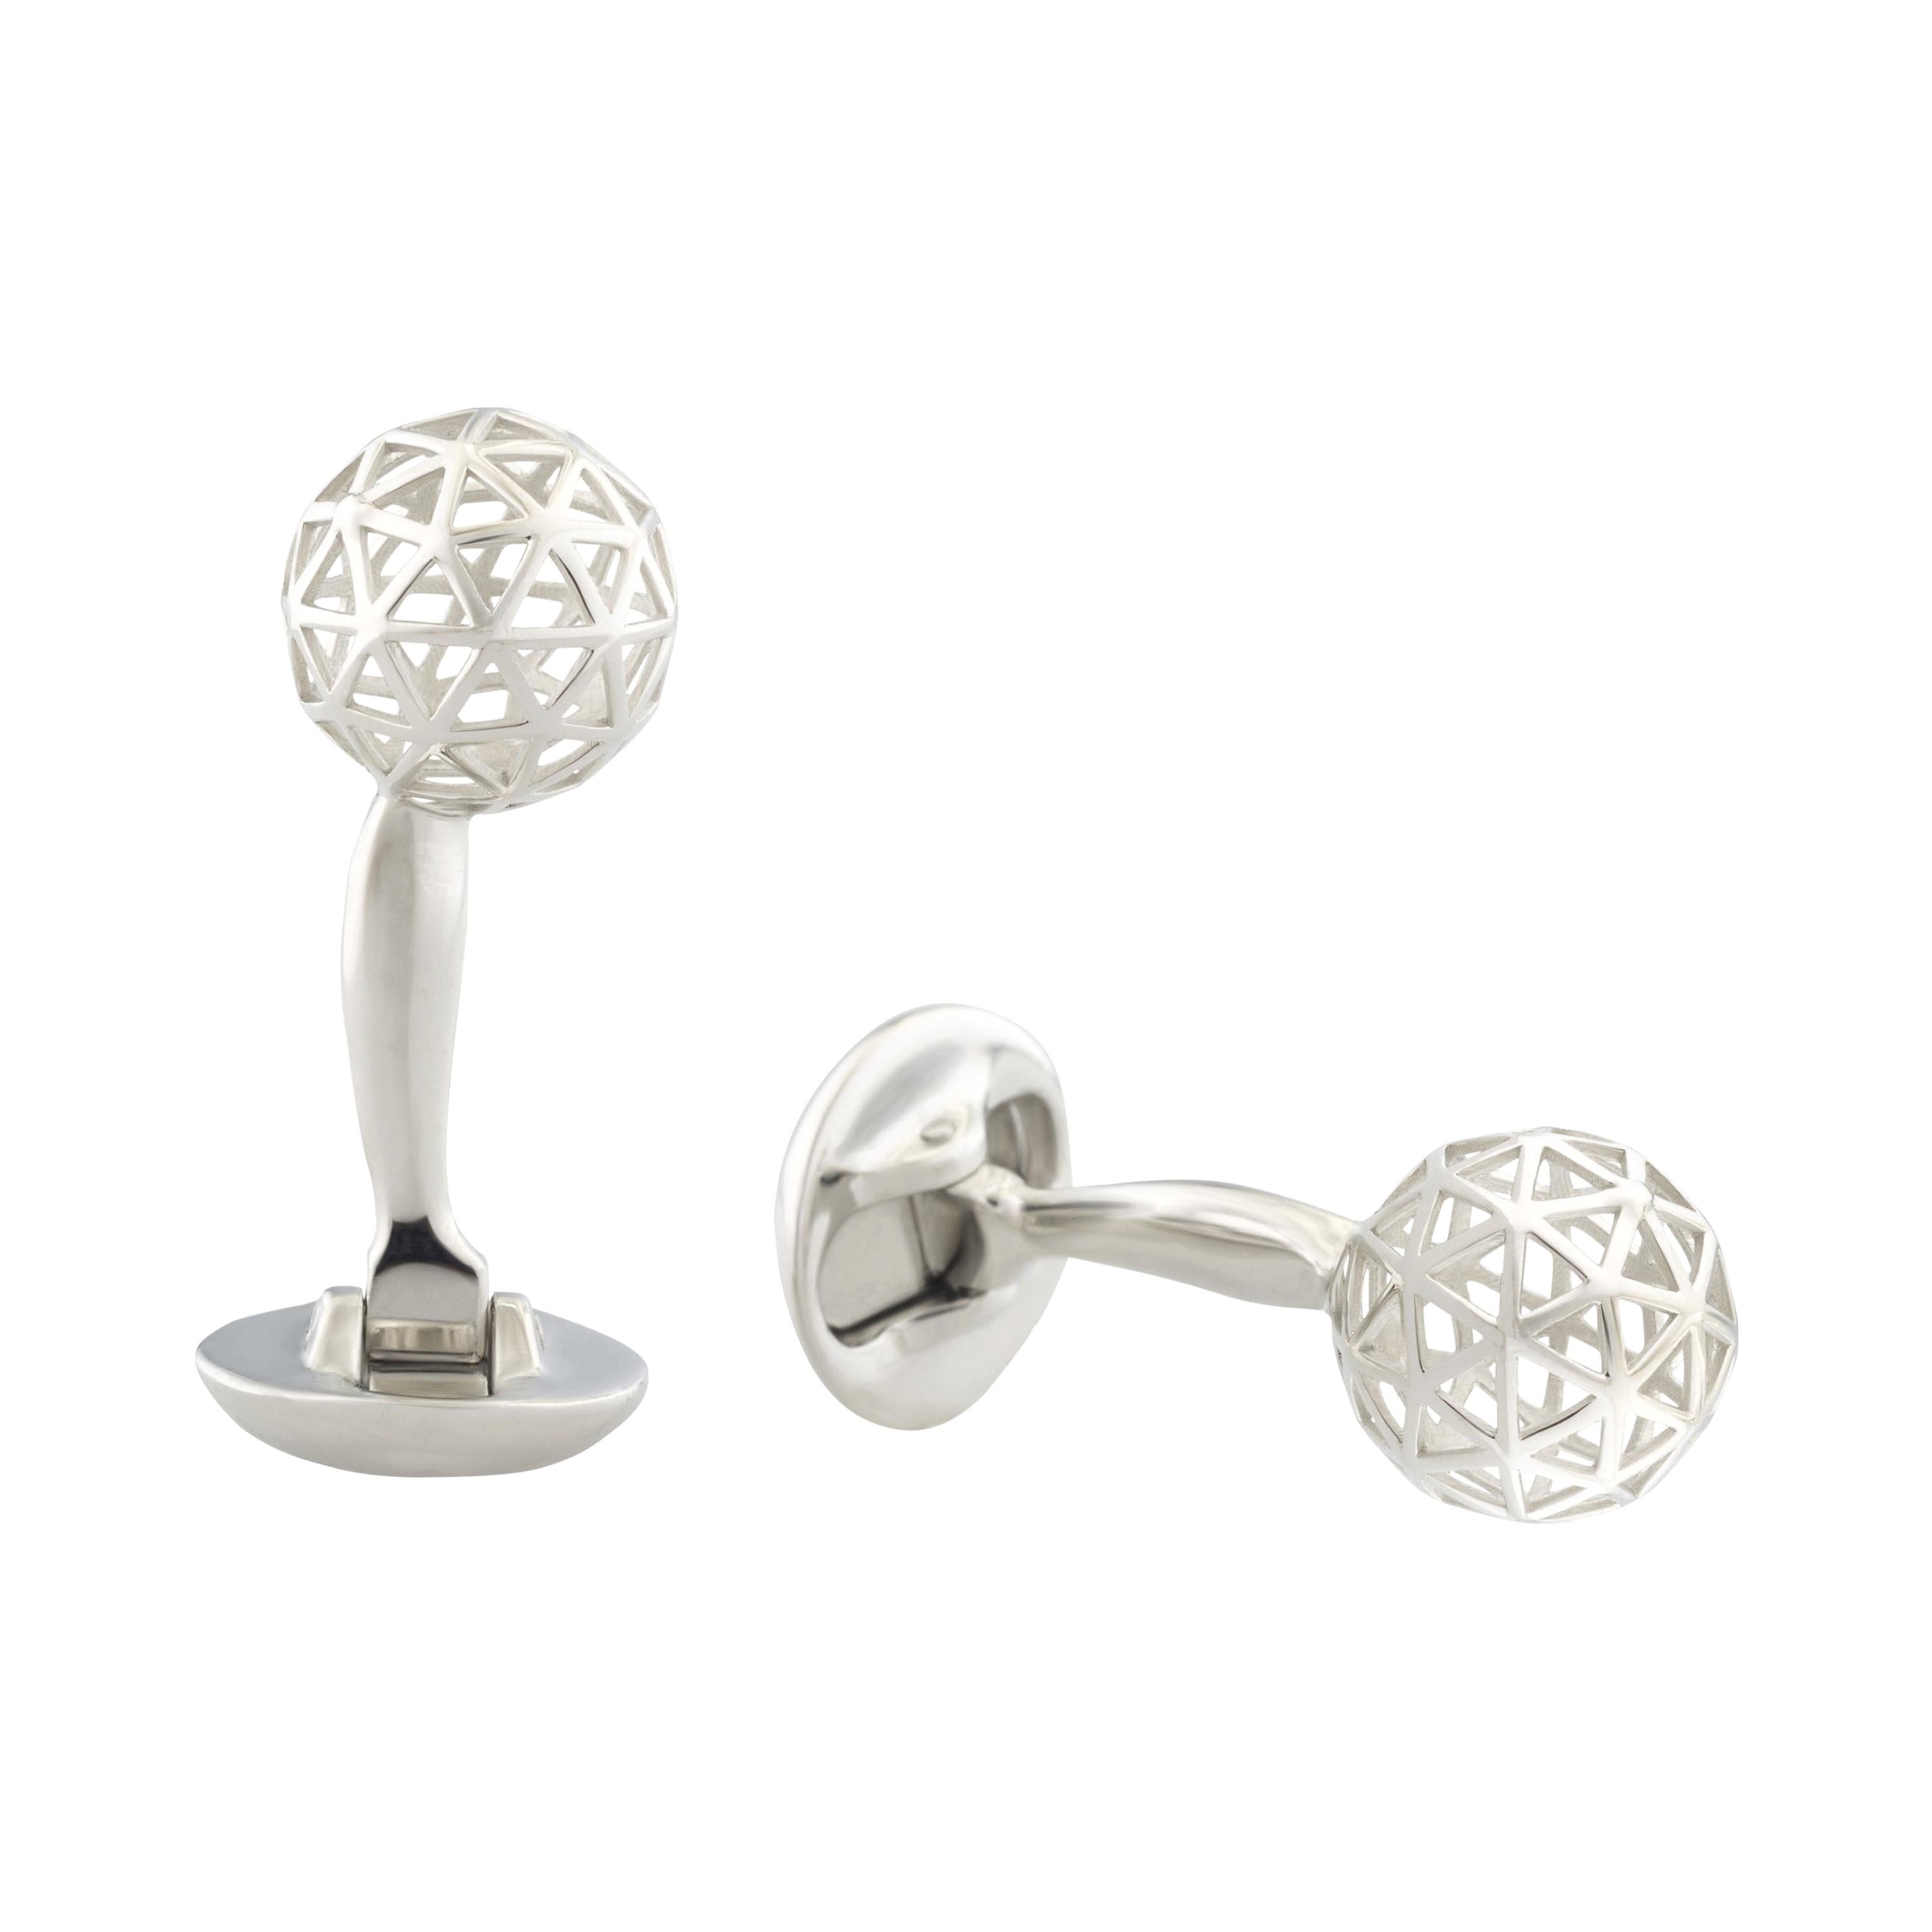 Sphere Geometric Cufflinks in Rhodium-Plated Sterling Silver by Fils Unique For Sale